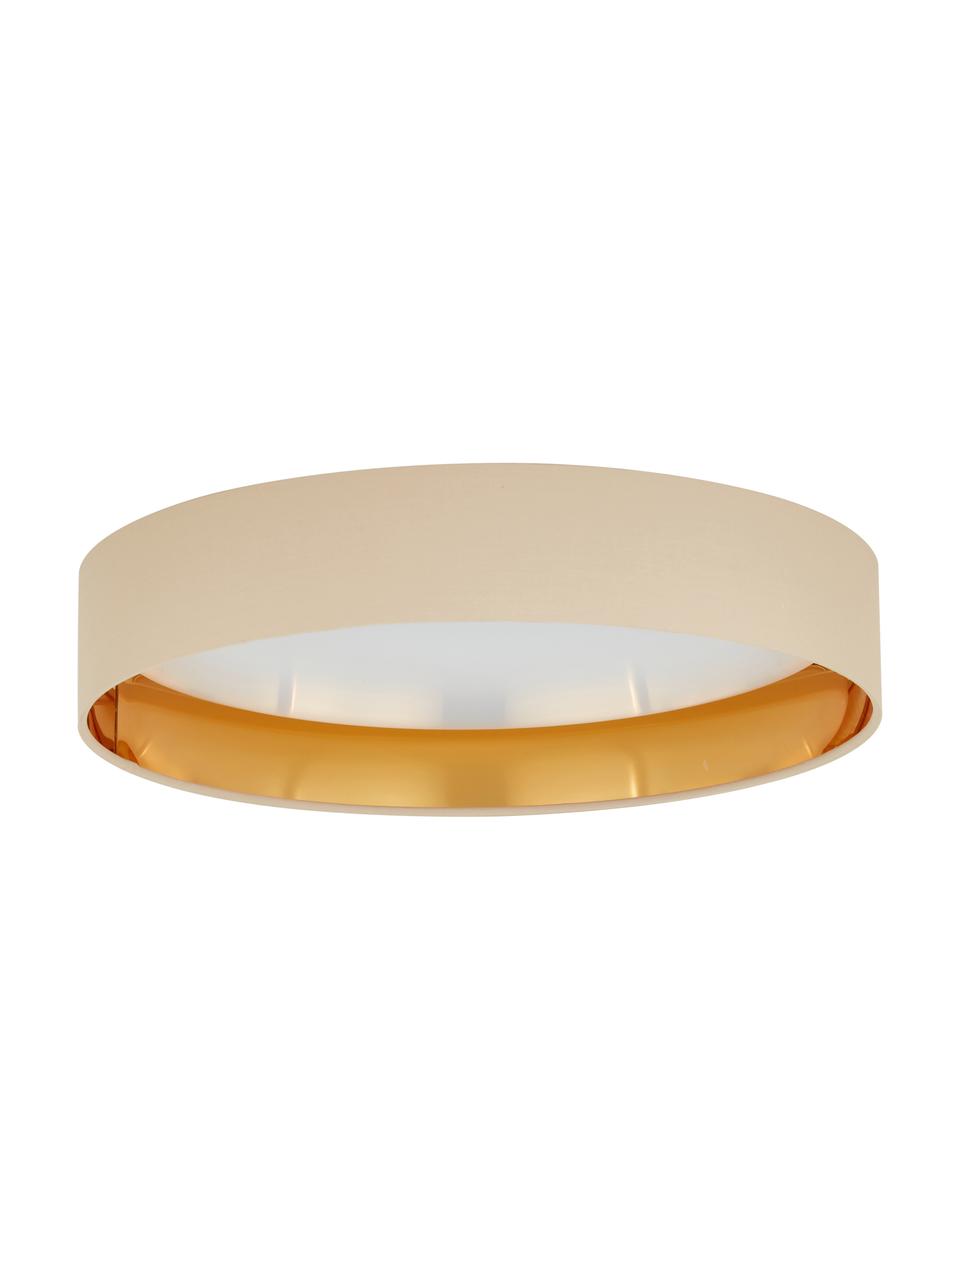 Plafonnier LED rond taupe Mallory, Taupe, Ø 41 x haut. 10 cm